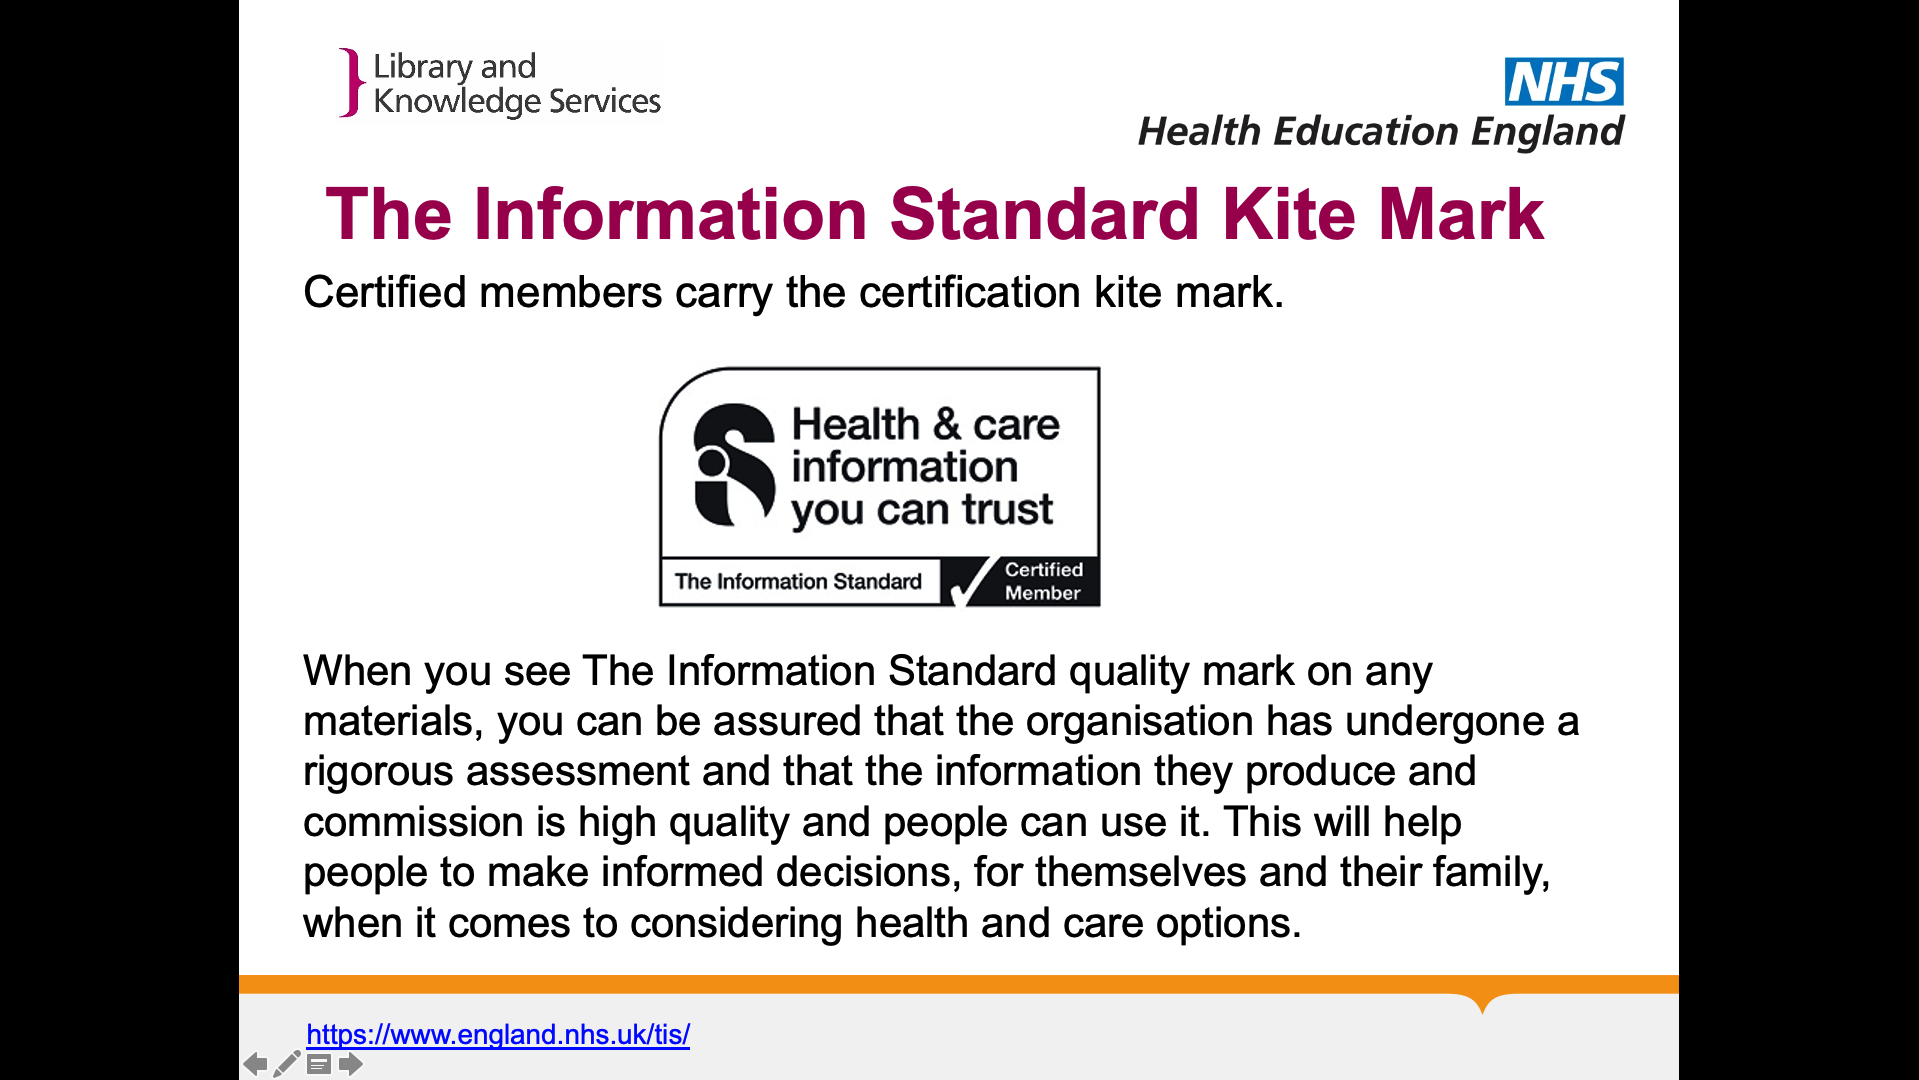 Title: The Information Standard Kite Mark. Text on page: Certified members carry the certification kite mark. [image of the information standard kite mark]  When you see The Information Standard quality mark on any materials, you can be assured that the organisation has undergone a rigorous assessment and that the information they produce and commission is high quality and people can use it. This will help people to make informed decisions, for themselves and their family, when it comes to considering health and care options.